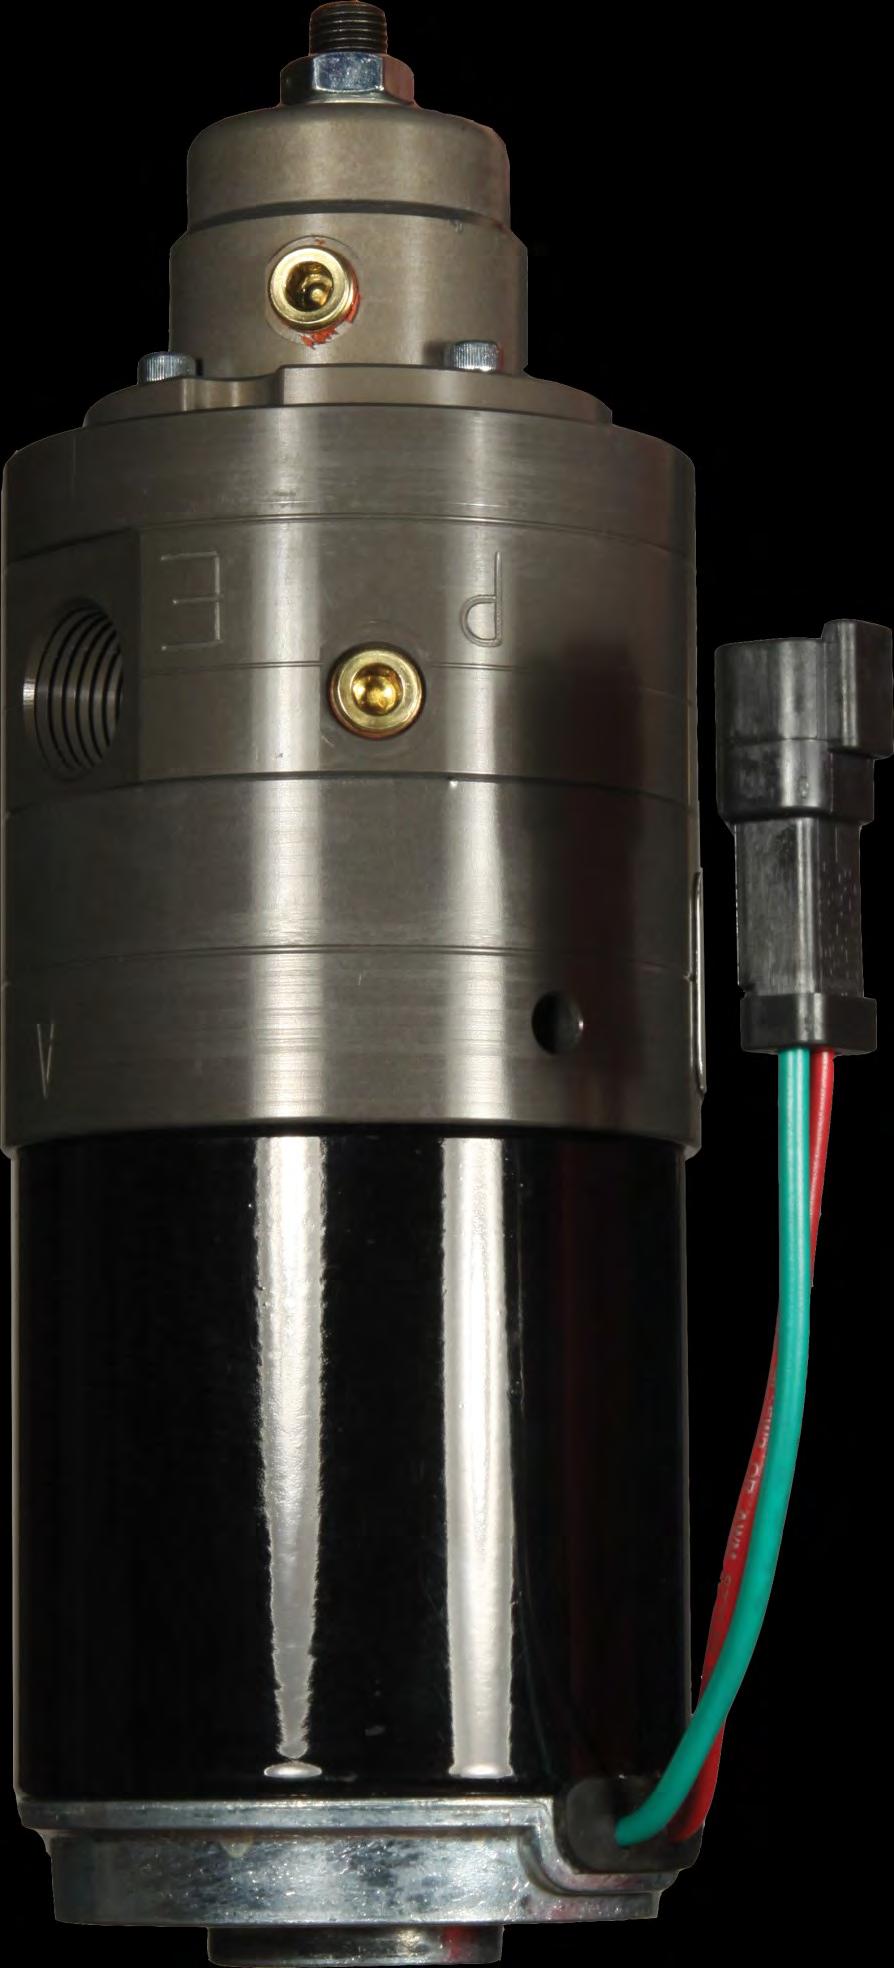 Adjustable Fuel Pump Series 95 or 150 GPH 16-18 PSI (Approximately) A fuel pressure gauge is highly recommended